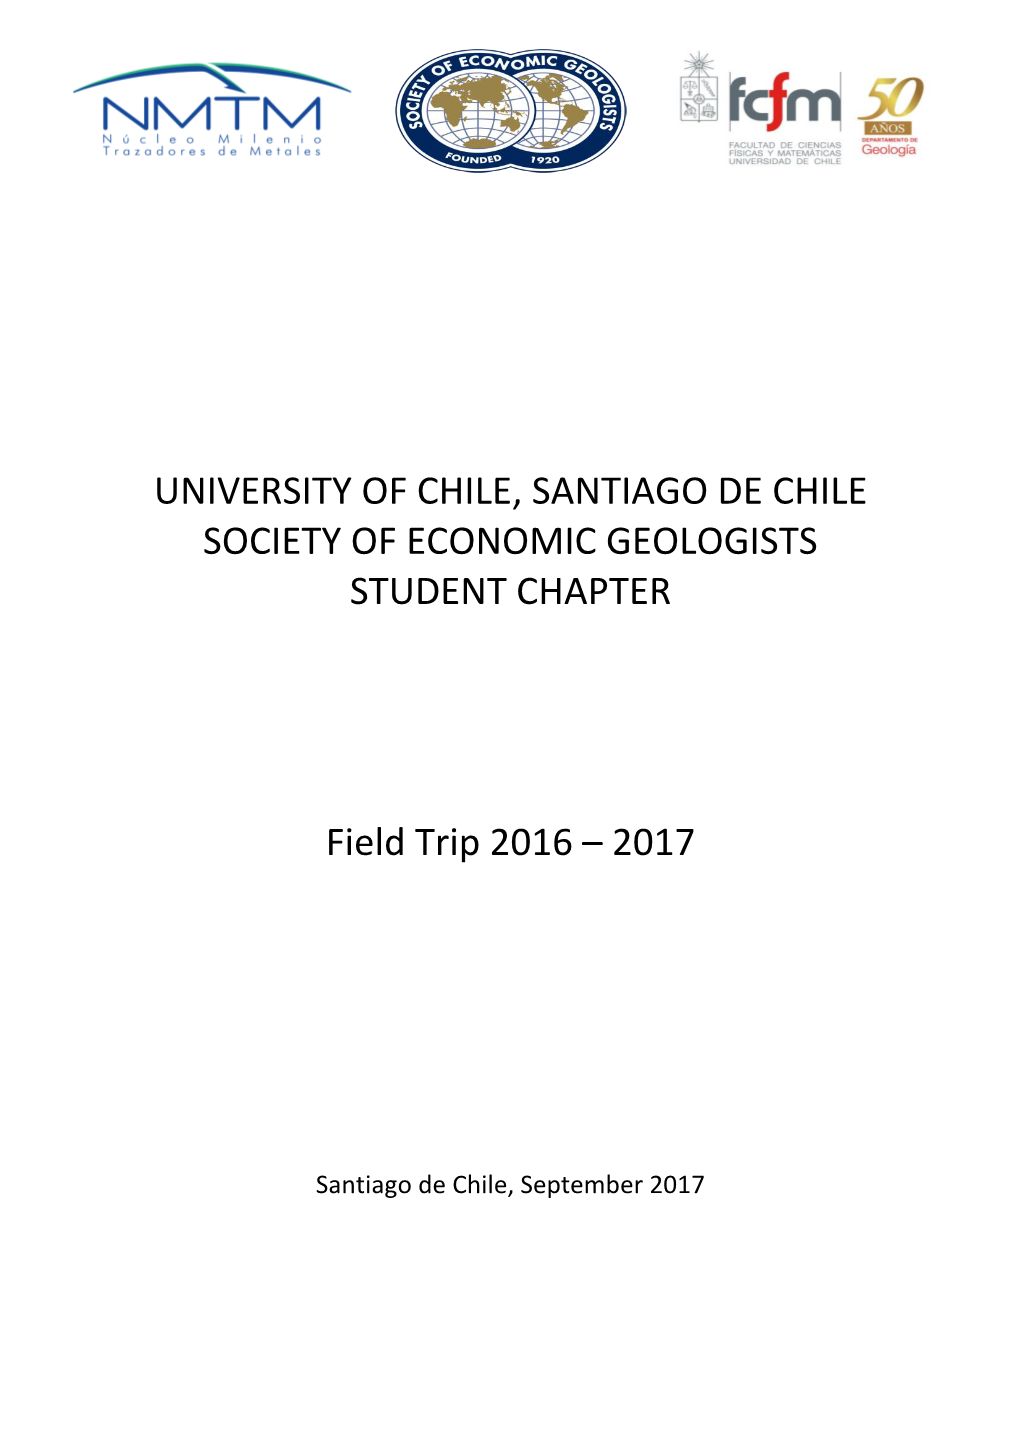 University of Chile, Santiago De Chile Society of Economic Geologists Student Chapter